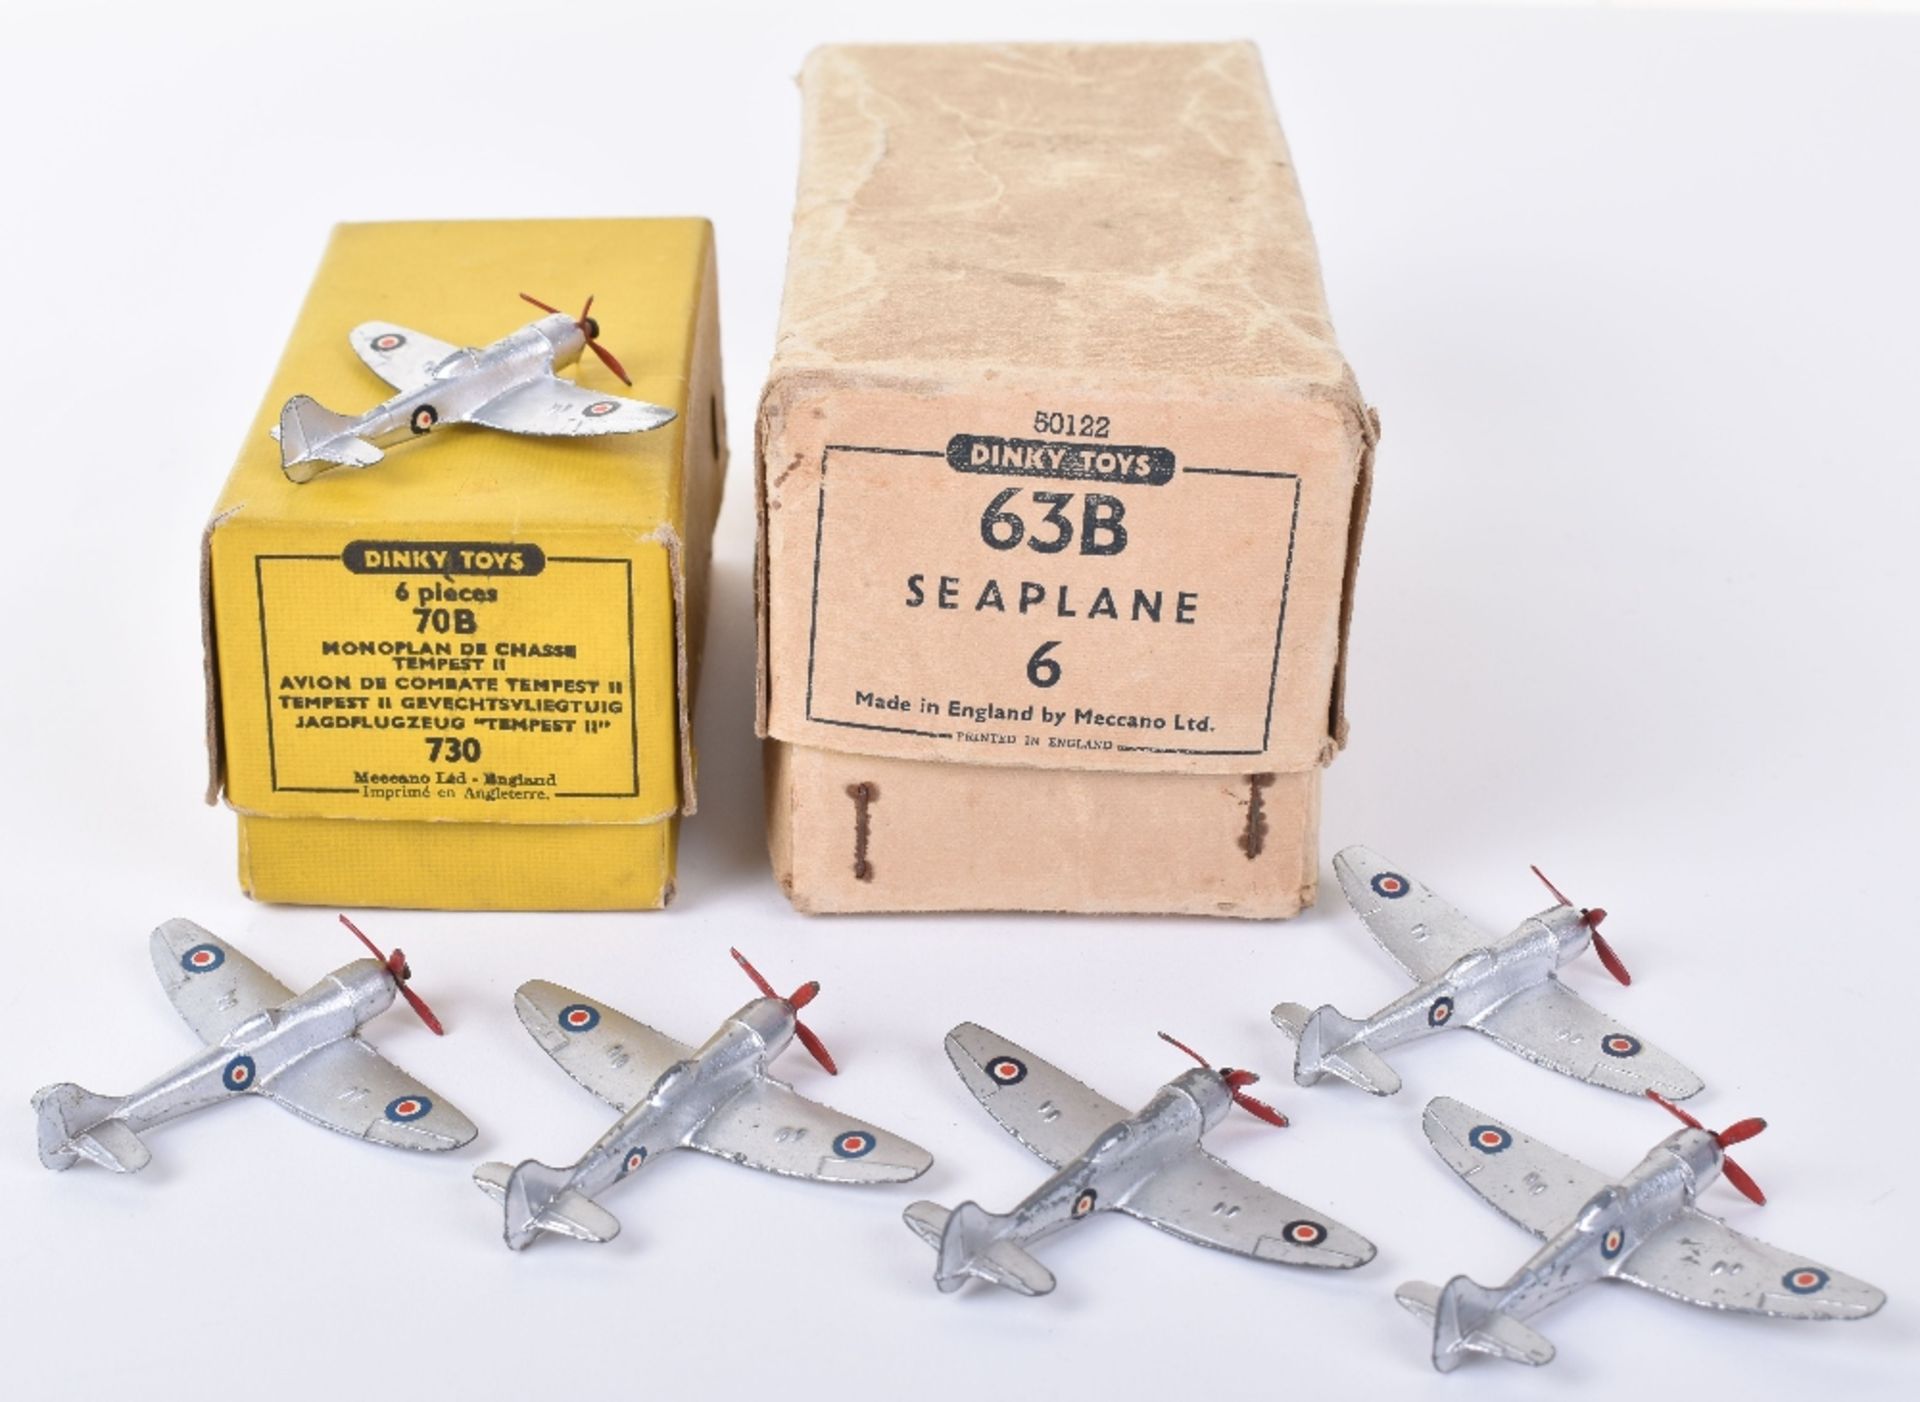 Dinky Toys 70B (730) Six Hawker Tempest II Fighters in Trade box, - Image 2 of 2